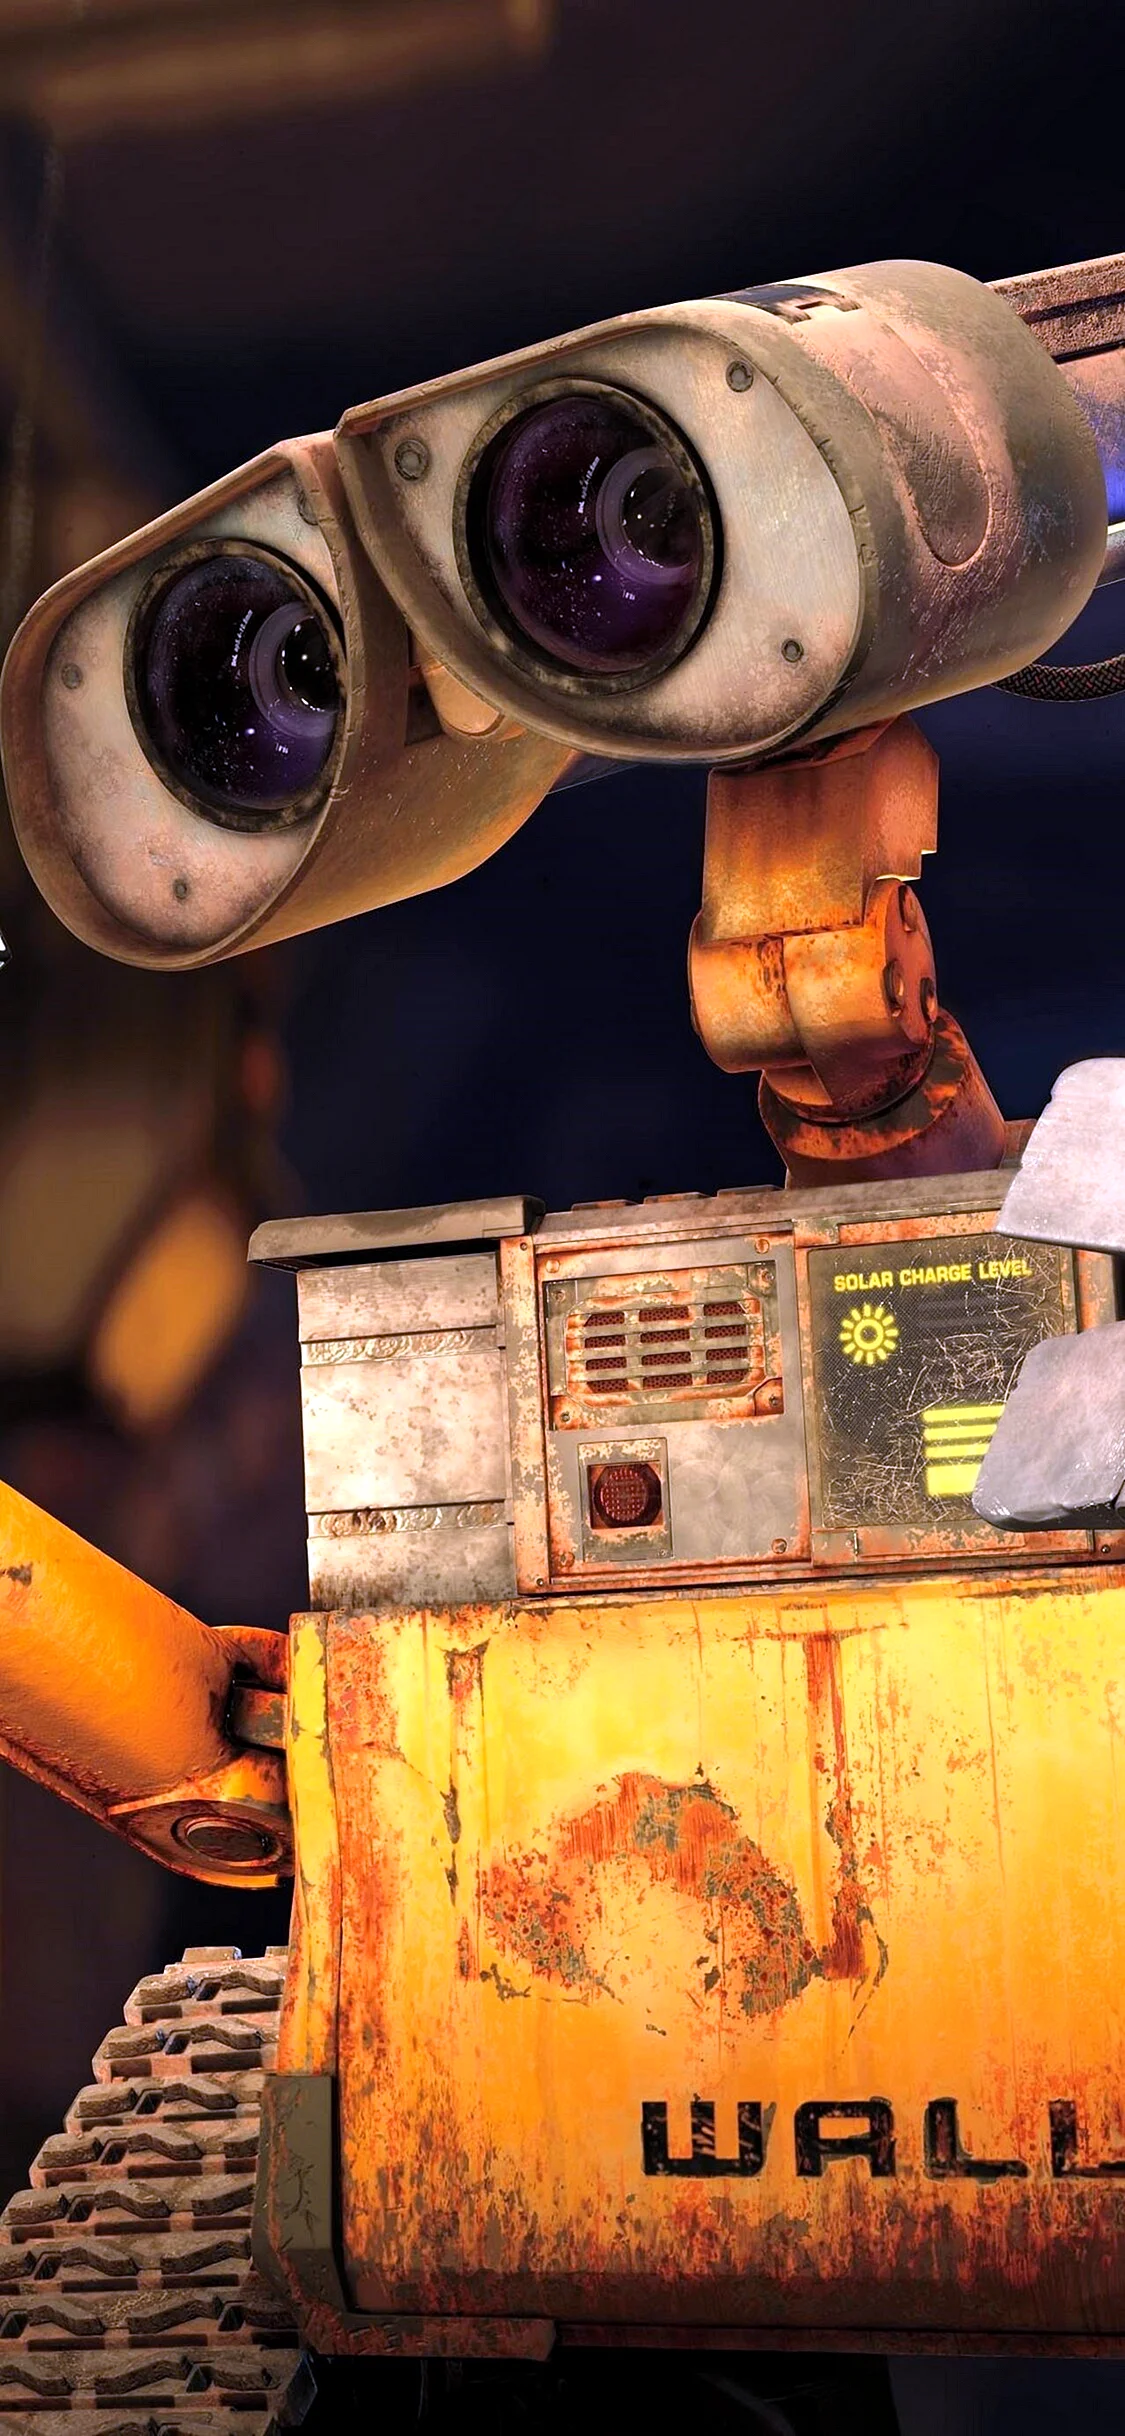 Wall-E 2008 Wallpaper for iPhone 11 Pro